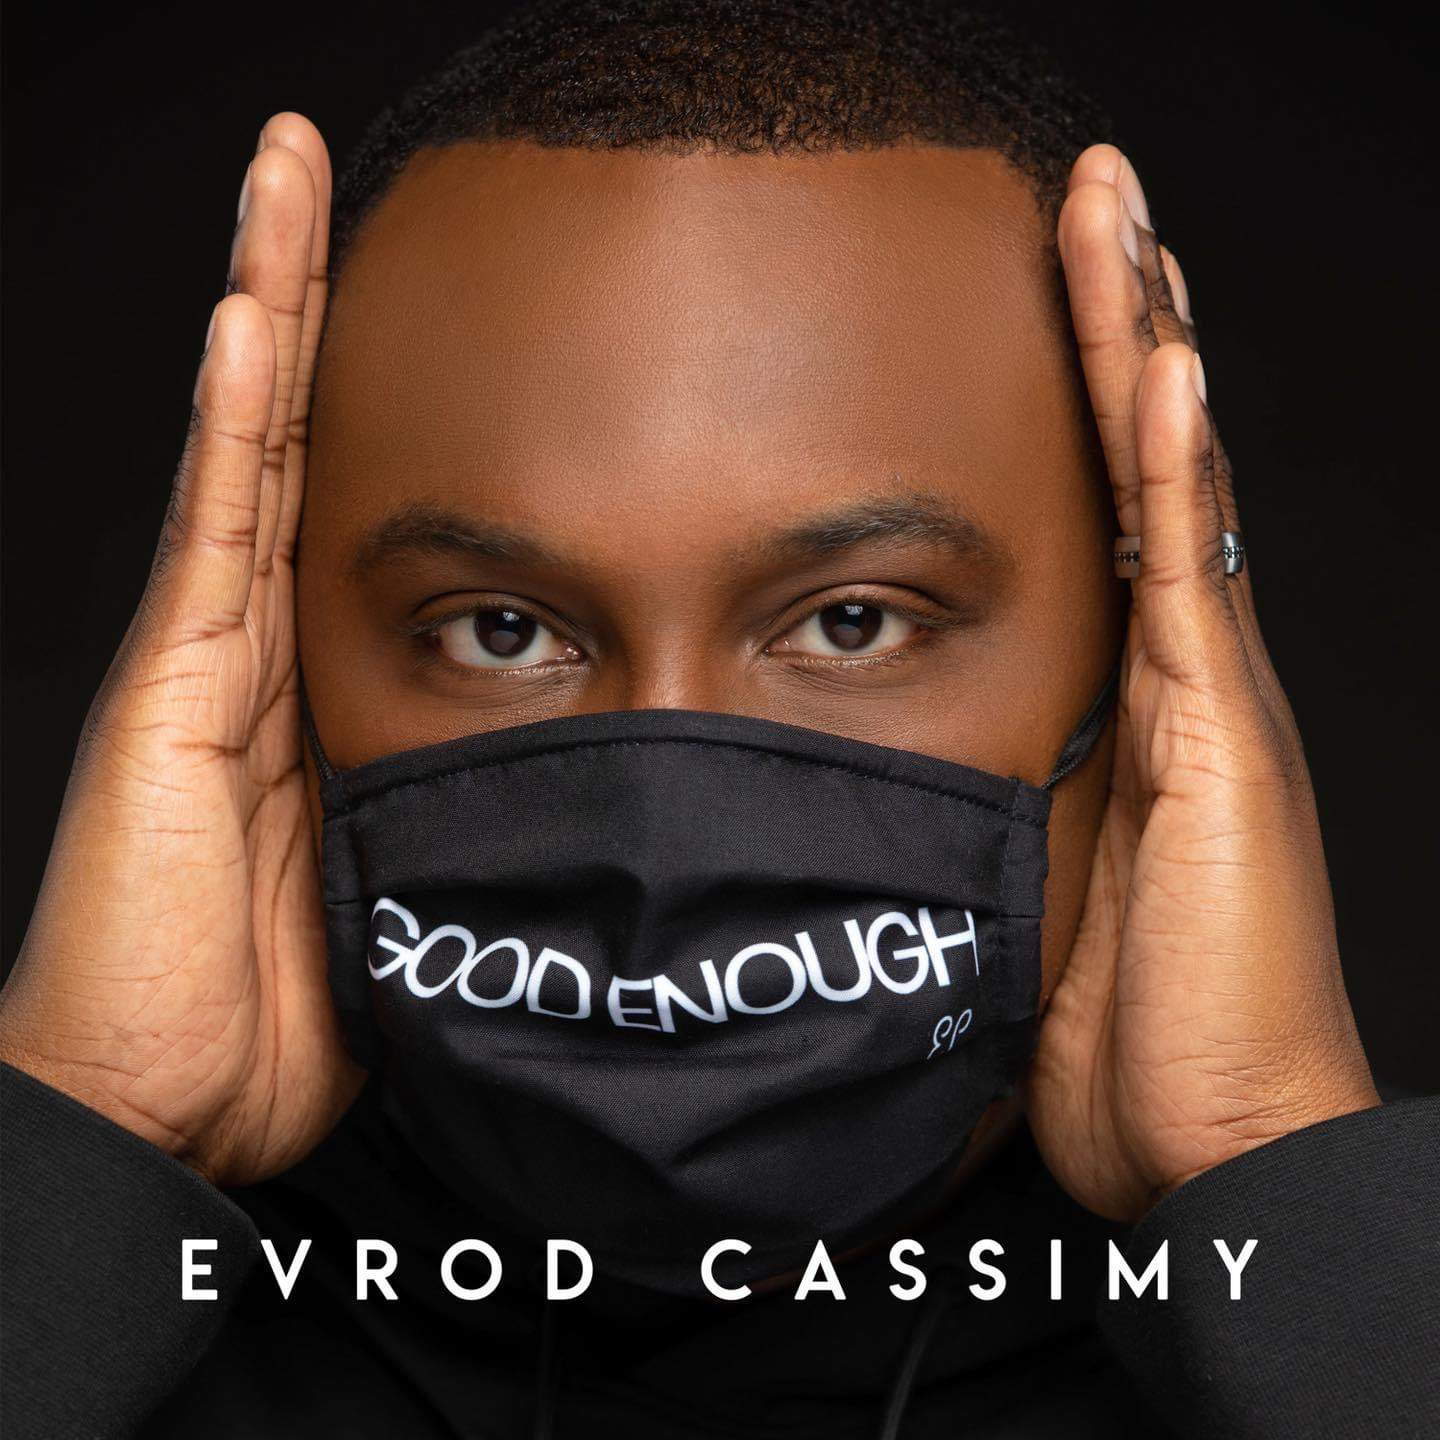 Local 4′s Evrod Cassimy partners with Detroit Public Schools Foundation on launch of ‘Good Enough’